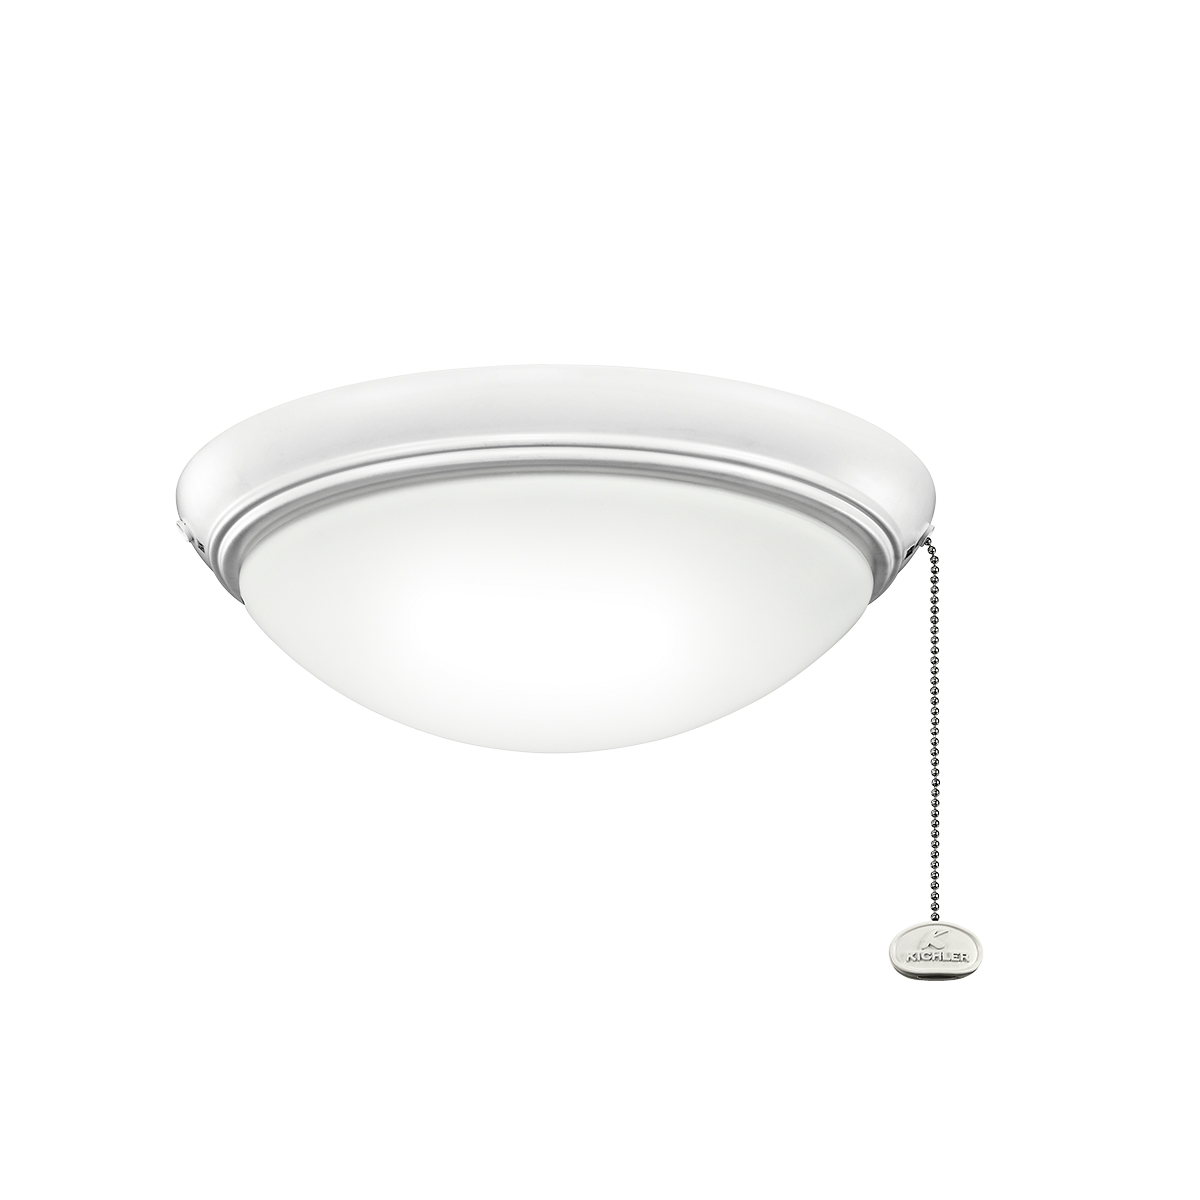 Low profile Etched Cased Opal LED Ceiling Fan fixture in Matte White